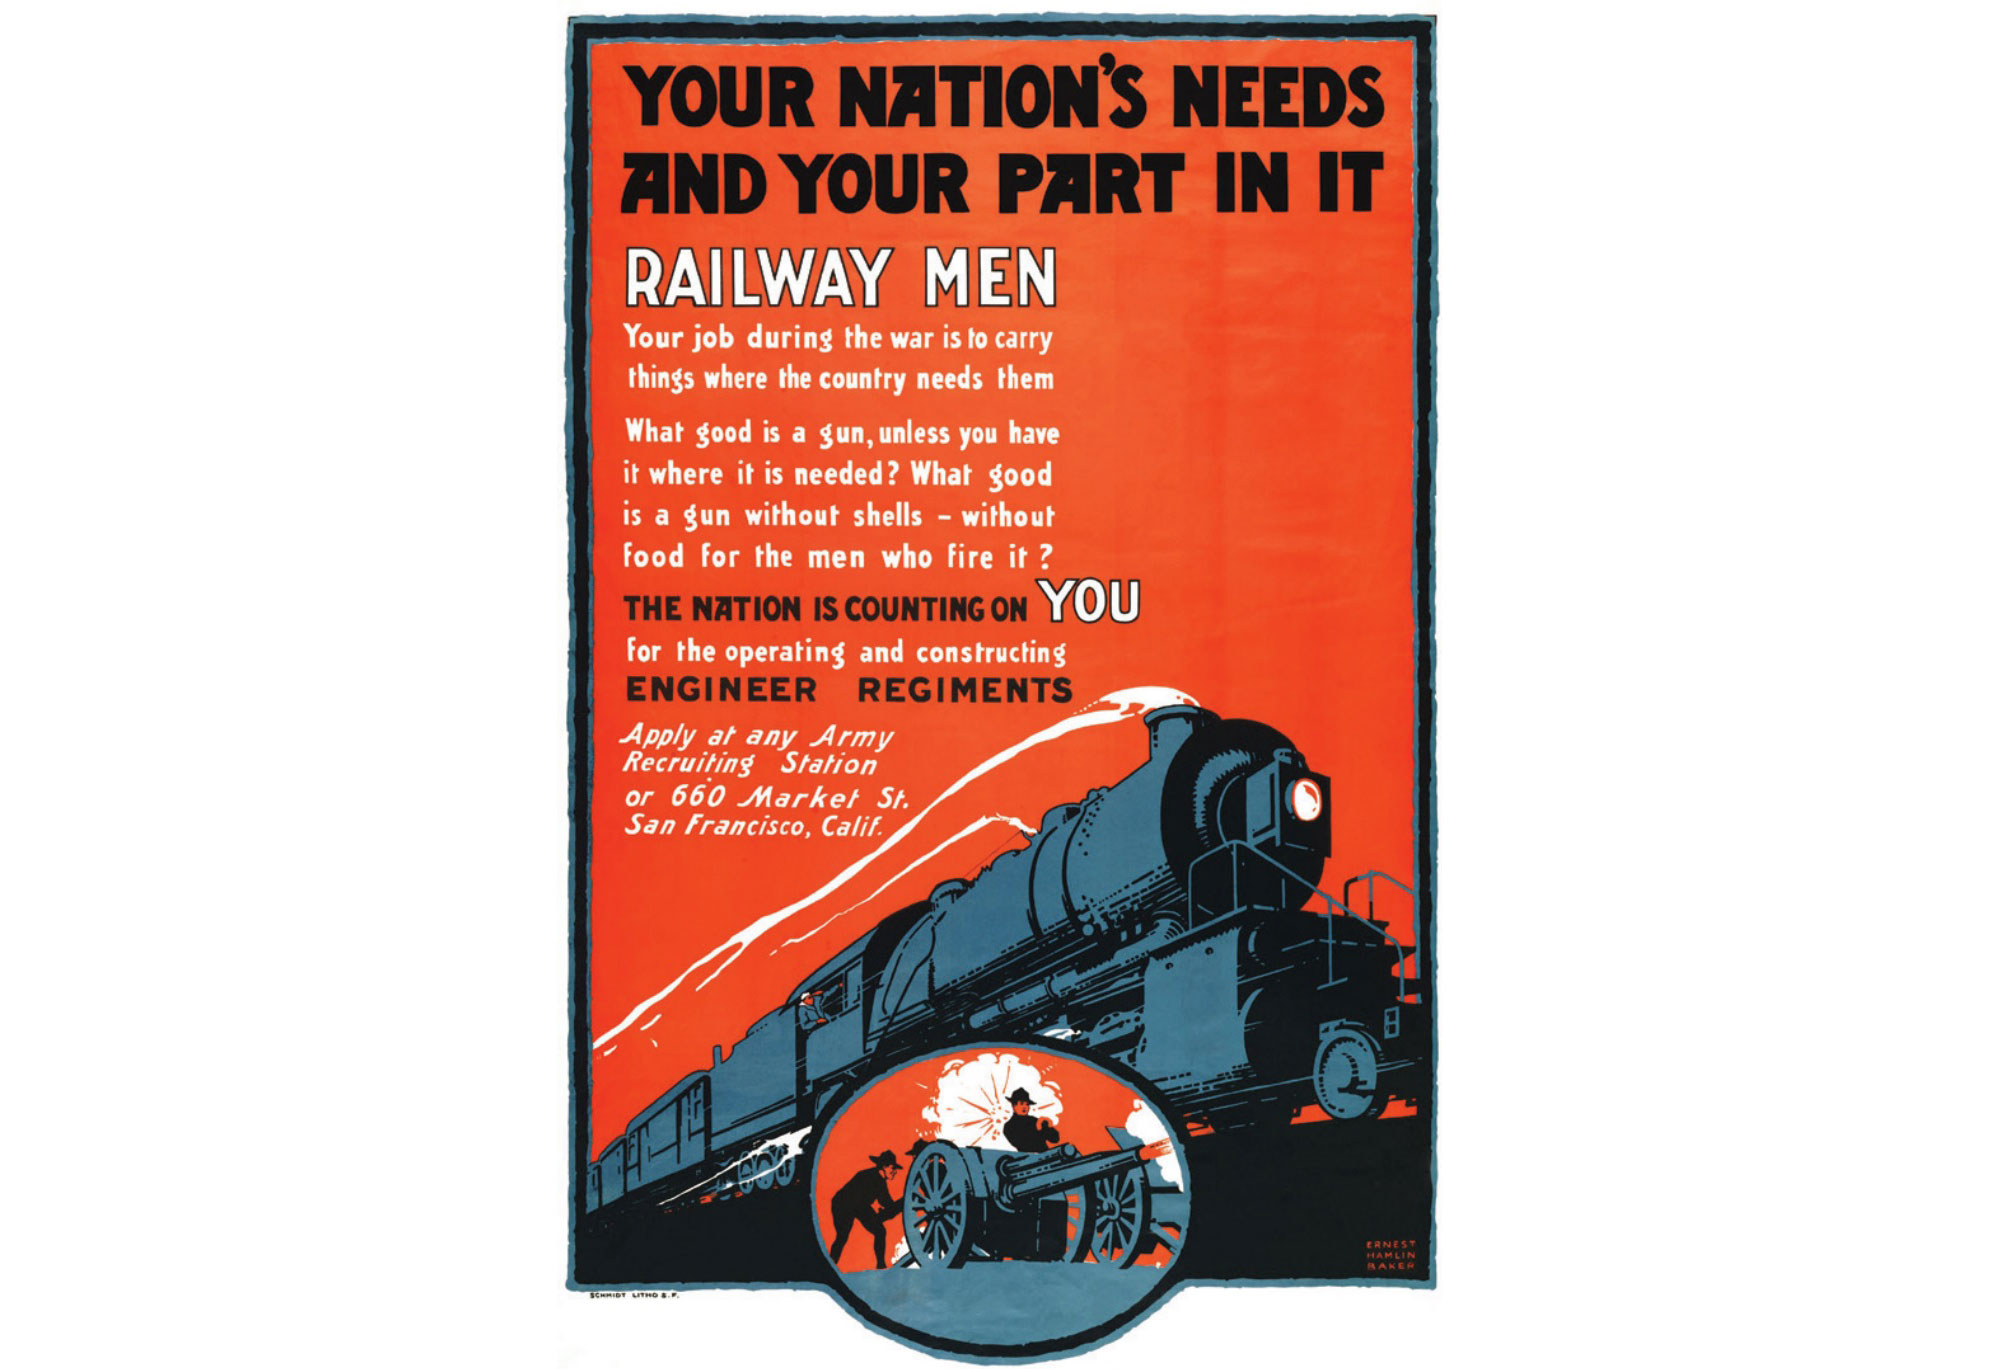 Advertisement about the need for railway men.